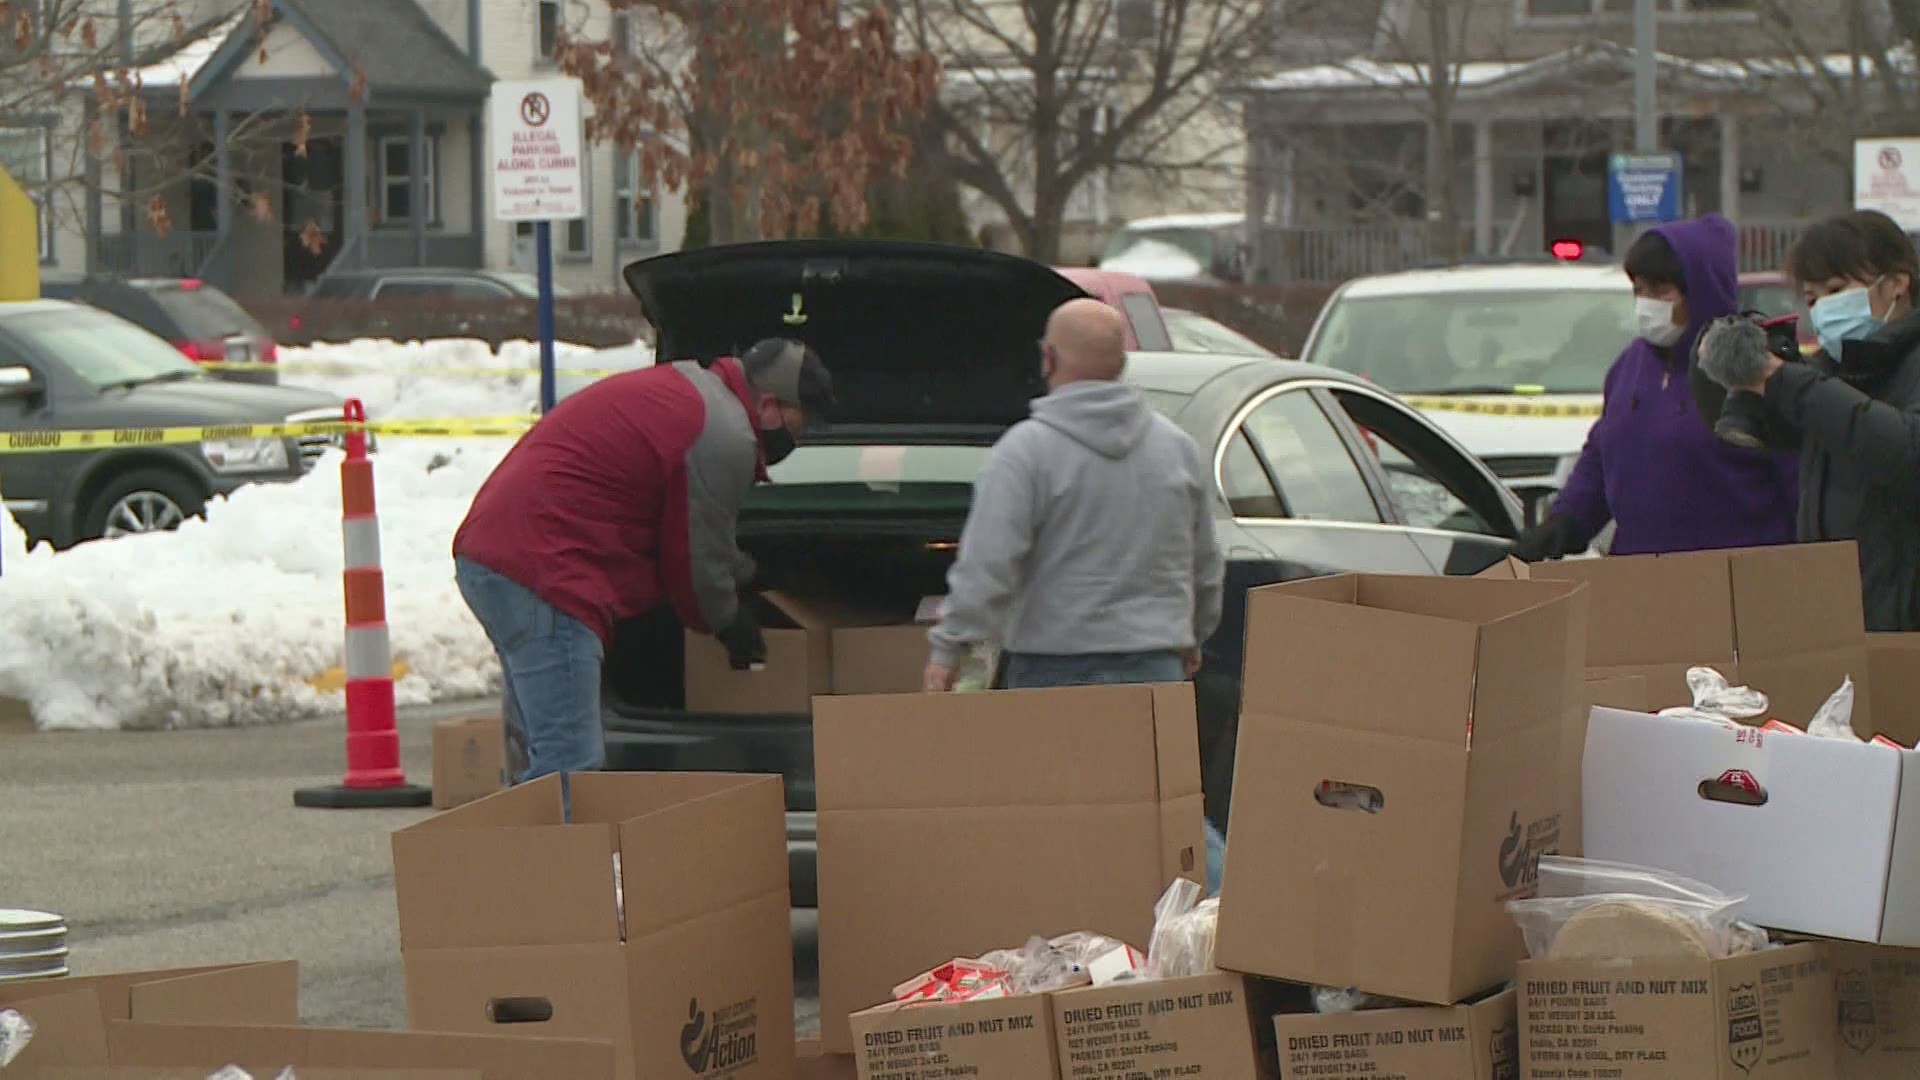 Food giveaway on Thursday, Jan. 7 in downtown Grand Rapids, Michigan until 1 p.m.